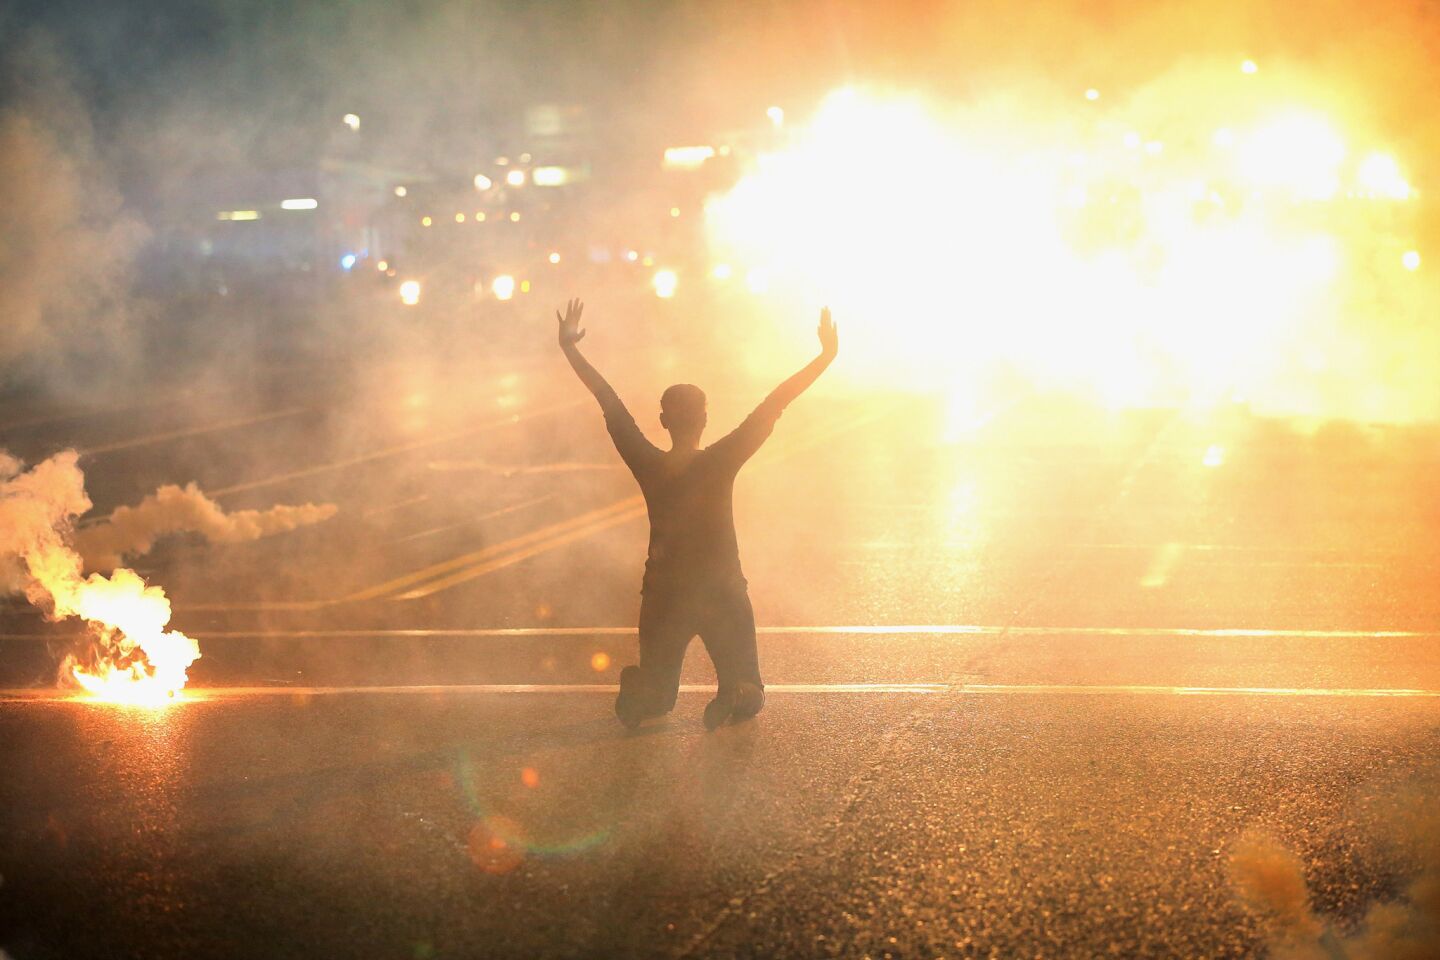 Tear gas reigns down on a woman kneeling in the street with her hands in the air in Ferguson.